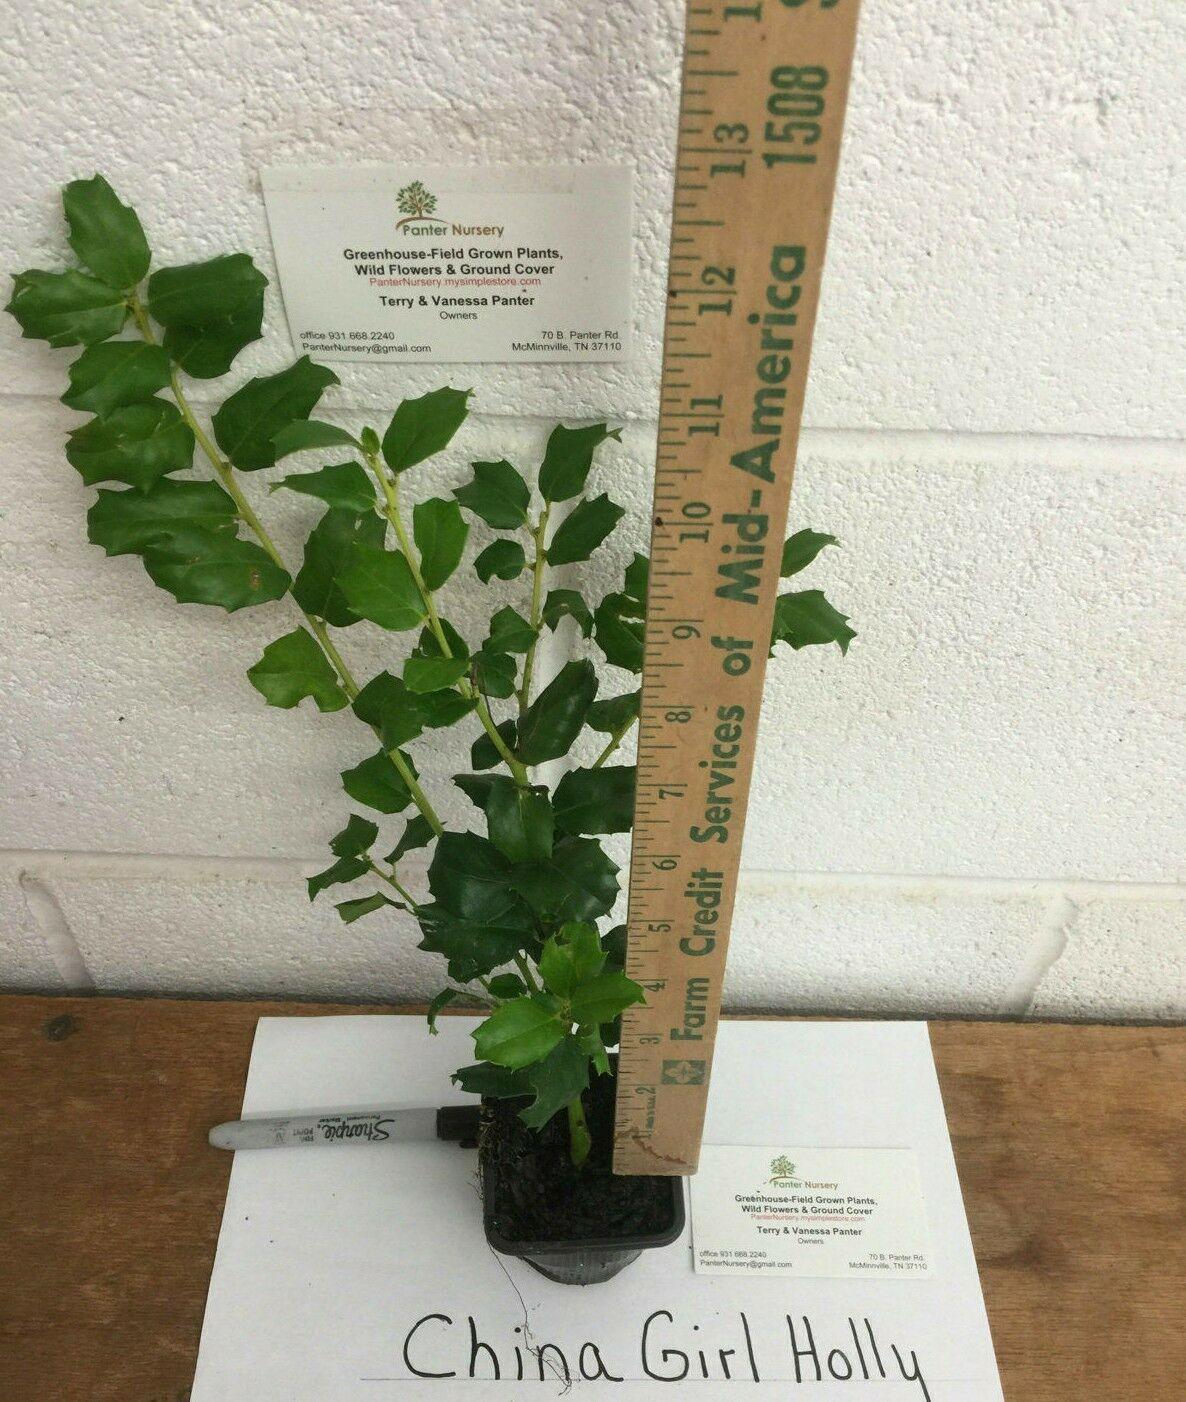 China Girl Holly Shrub - Live Potted Plant - 6-12" Tall Seedling - 2.5" Pot - The Nursery Center